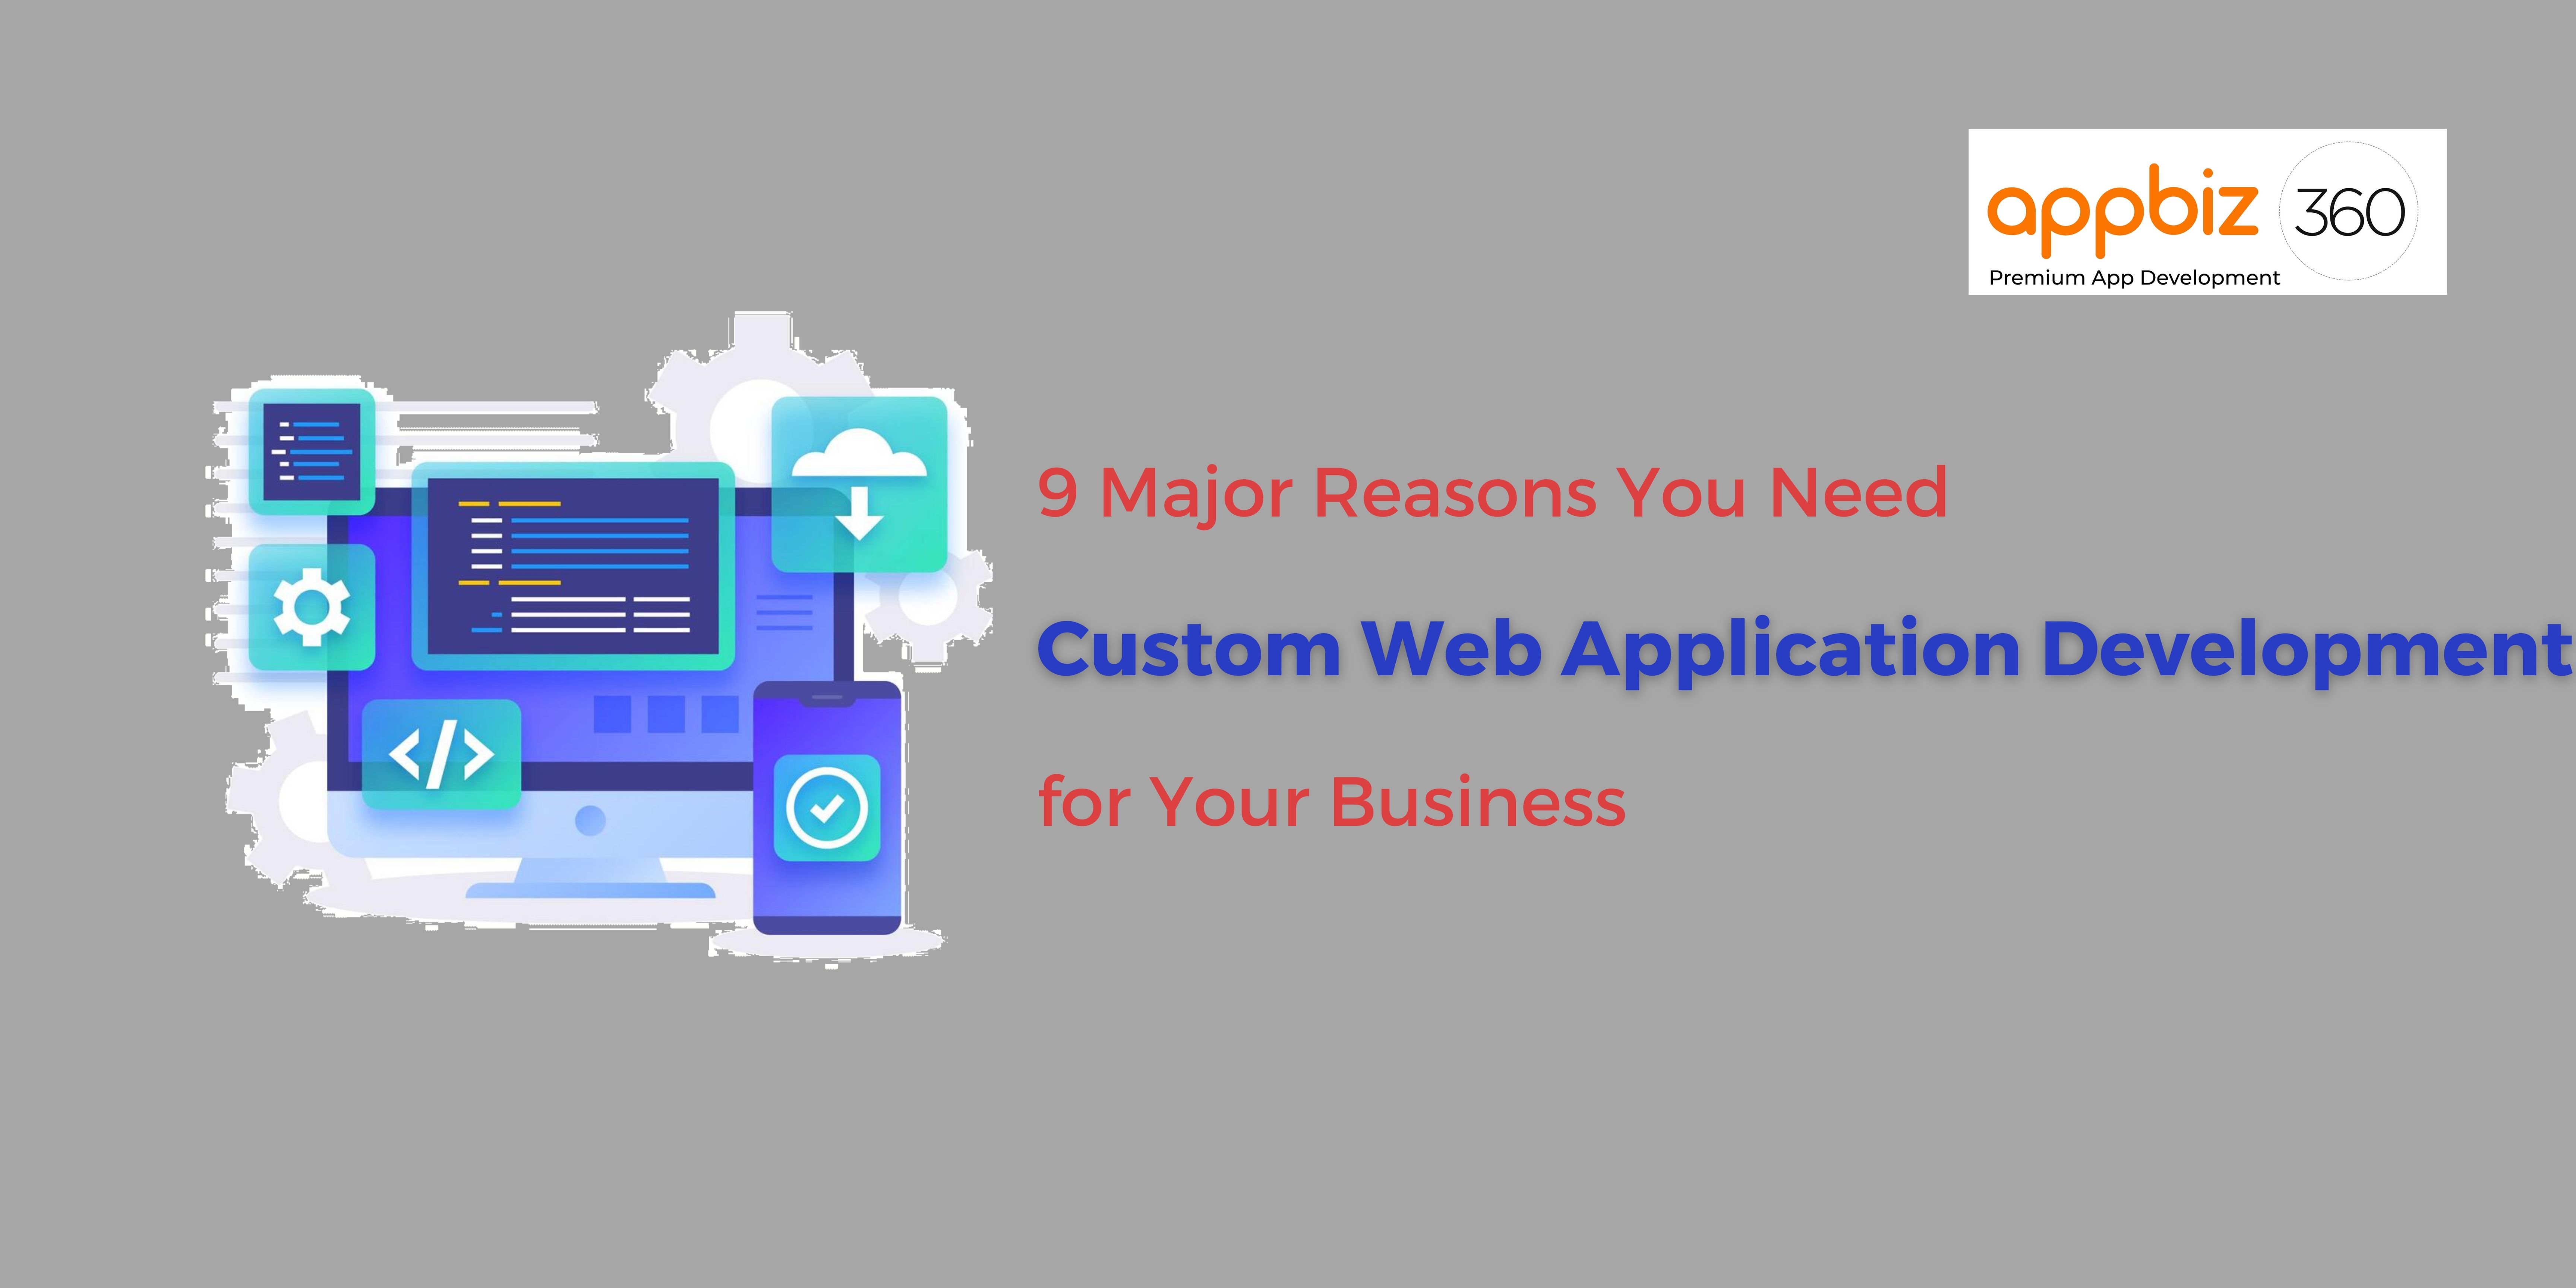 9 Major Reasons You Need Custom Web Application Development for Your Business